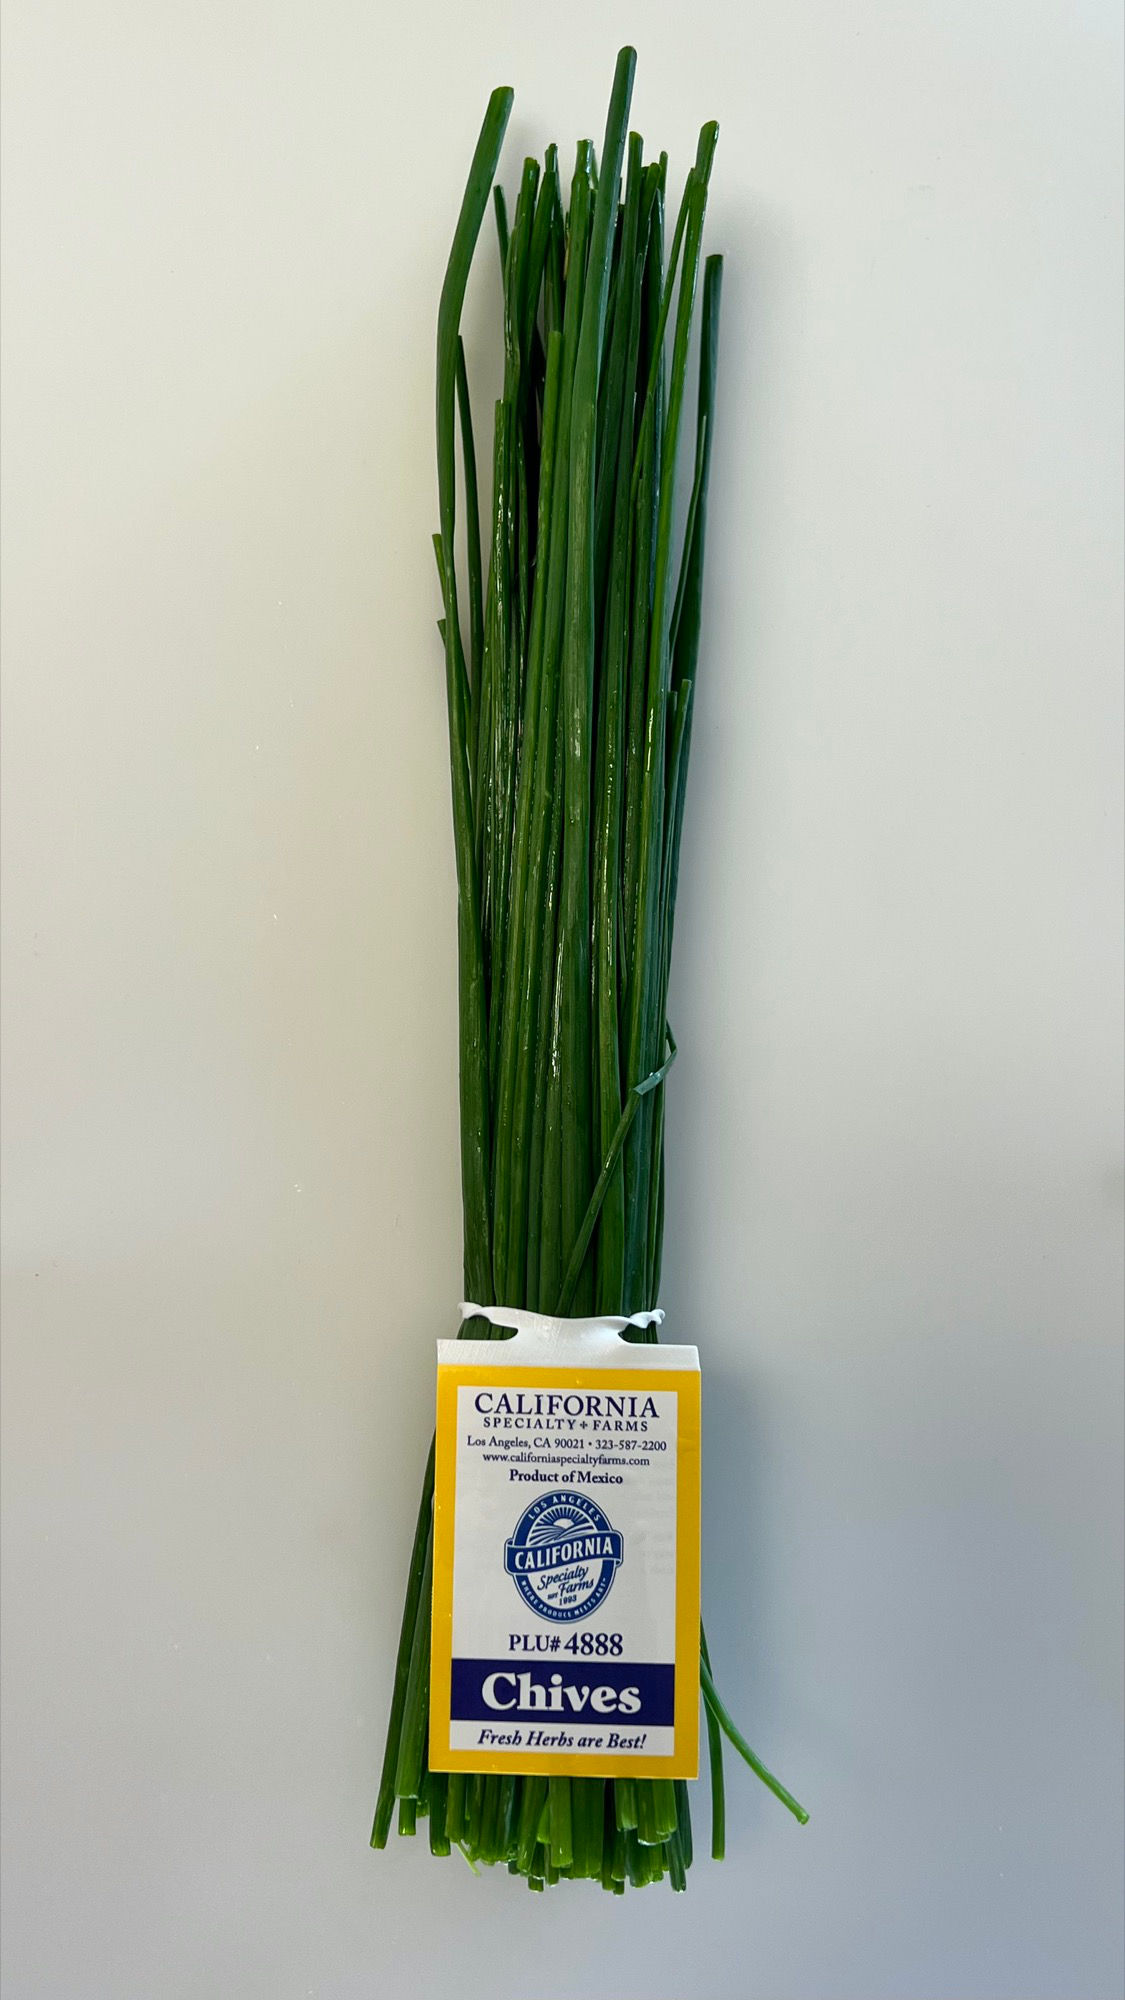 Chives from California